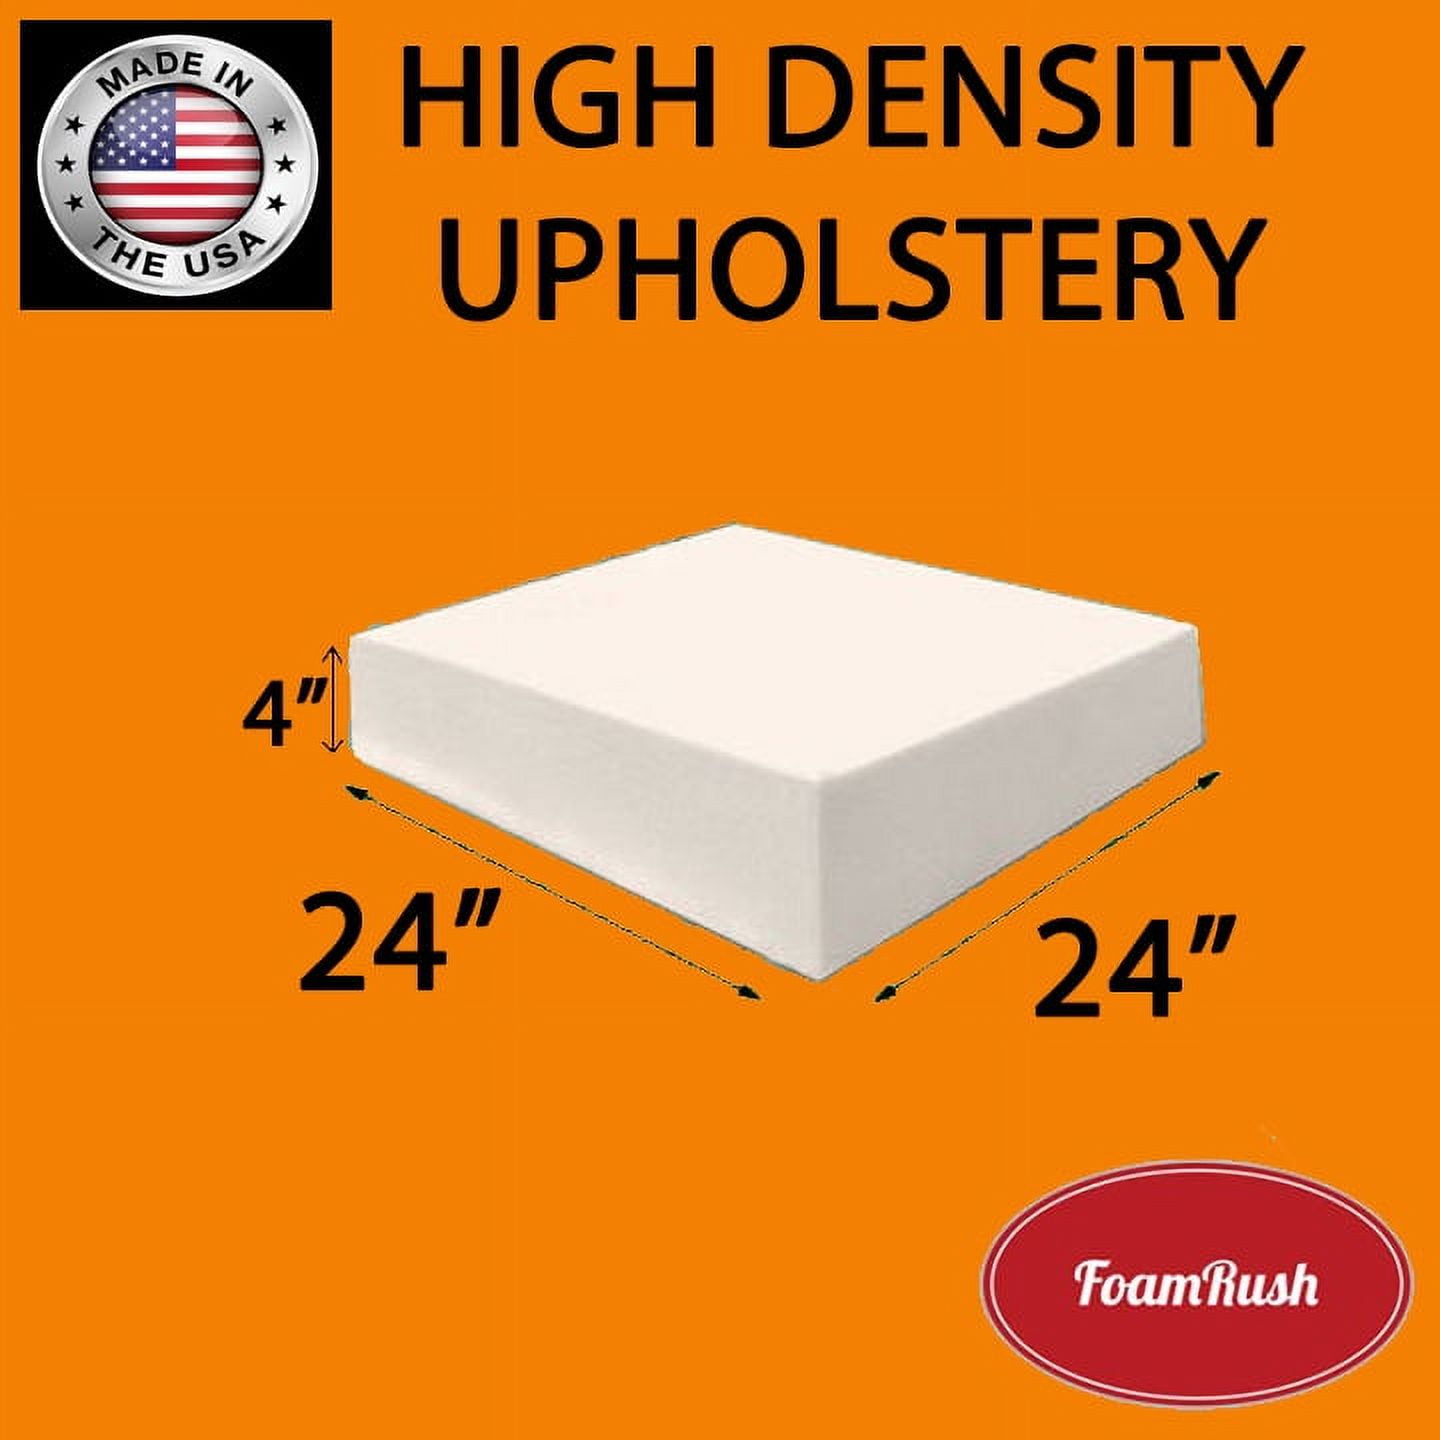  Foamma 6 x 24 x 72 High Density Upholstery Foam Cushion,Seat  Replacement, Upholstery Sheet, Foam Padding Made in USA!!! : Arts, Crafts &  Sewing